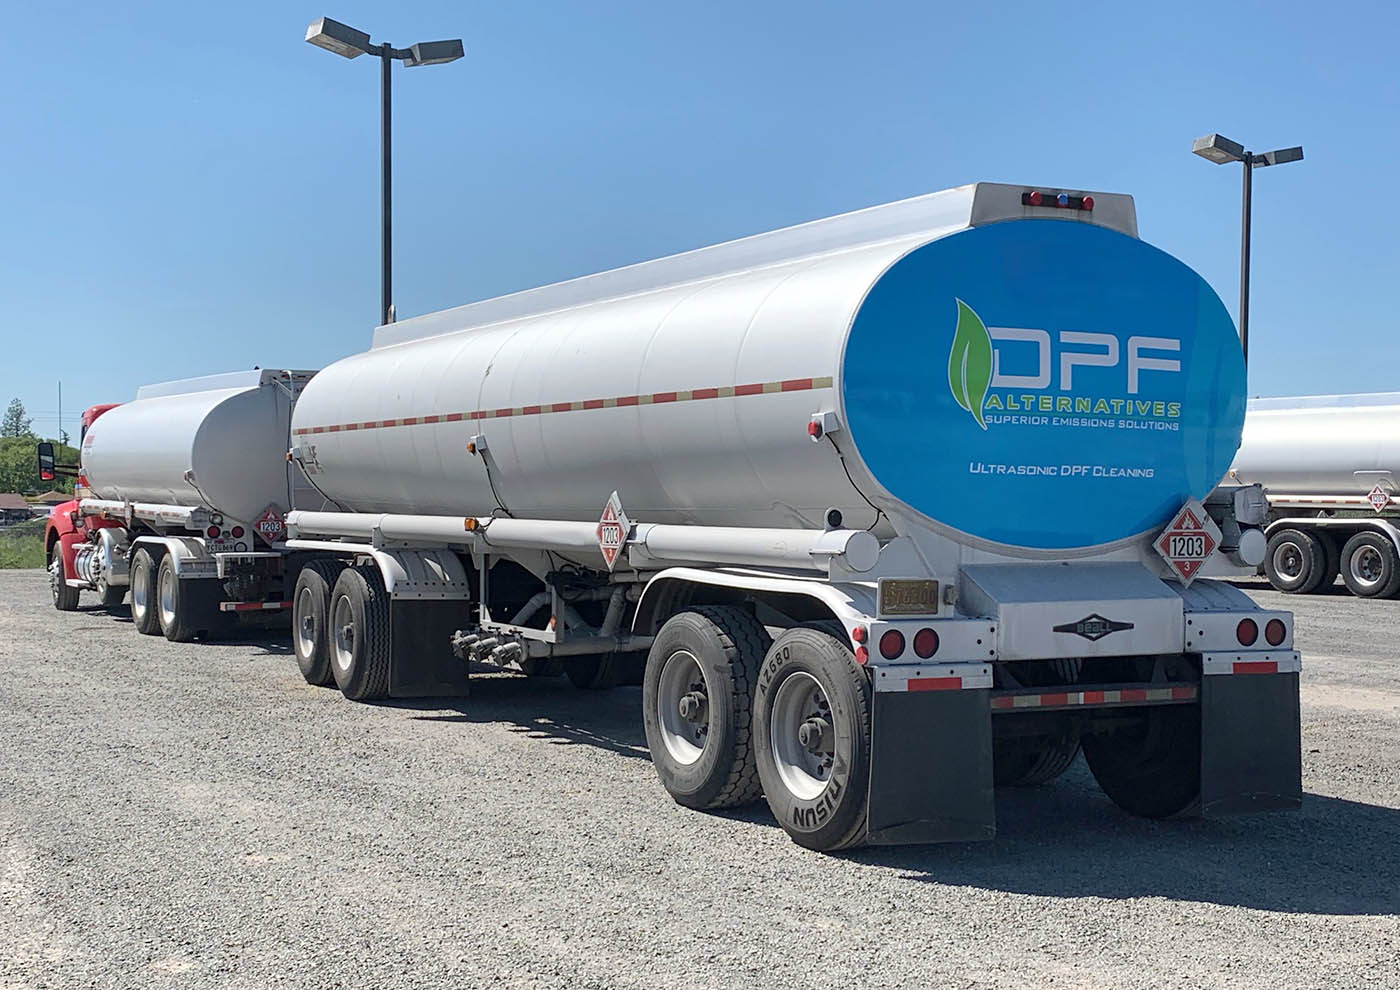 Back of a clean, large, reflective semi truck rig, contact DPF Alternatives for a DPF cleaning in St. George / Cedar City.